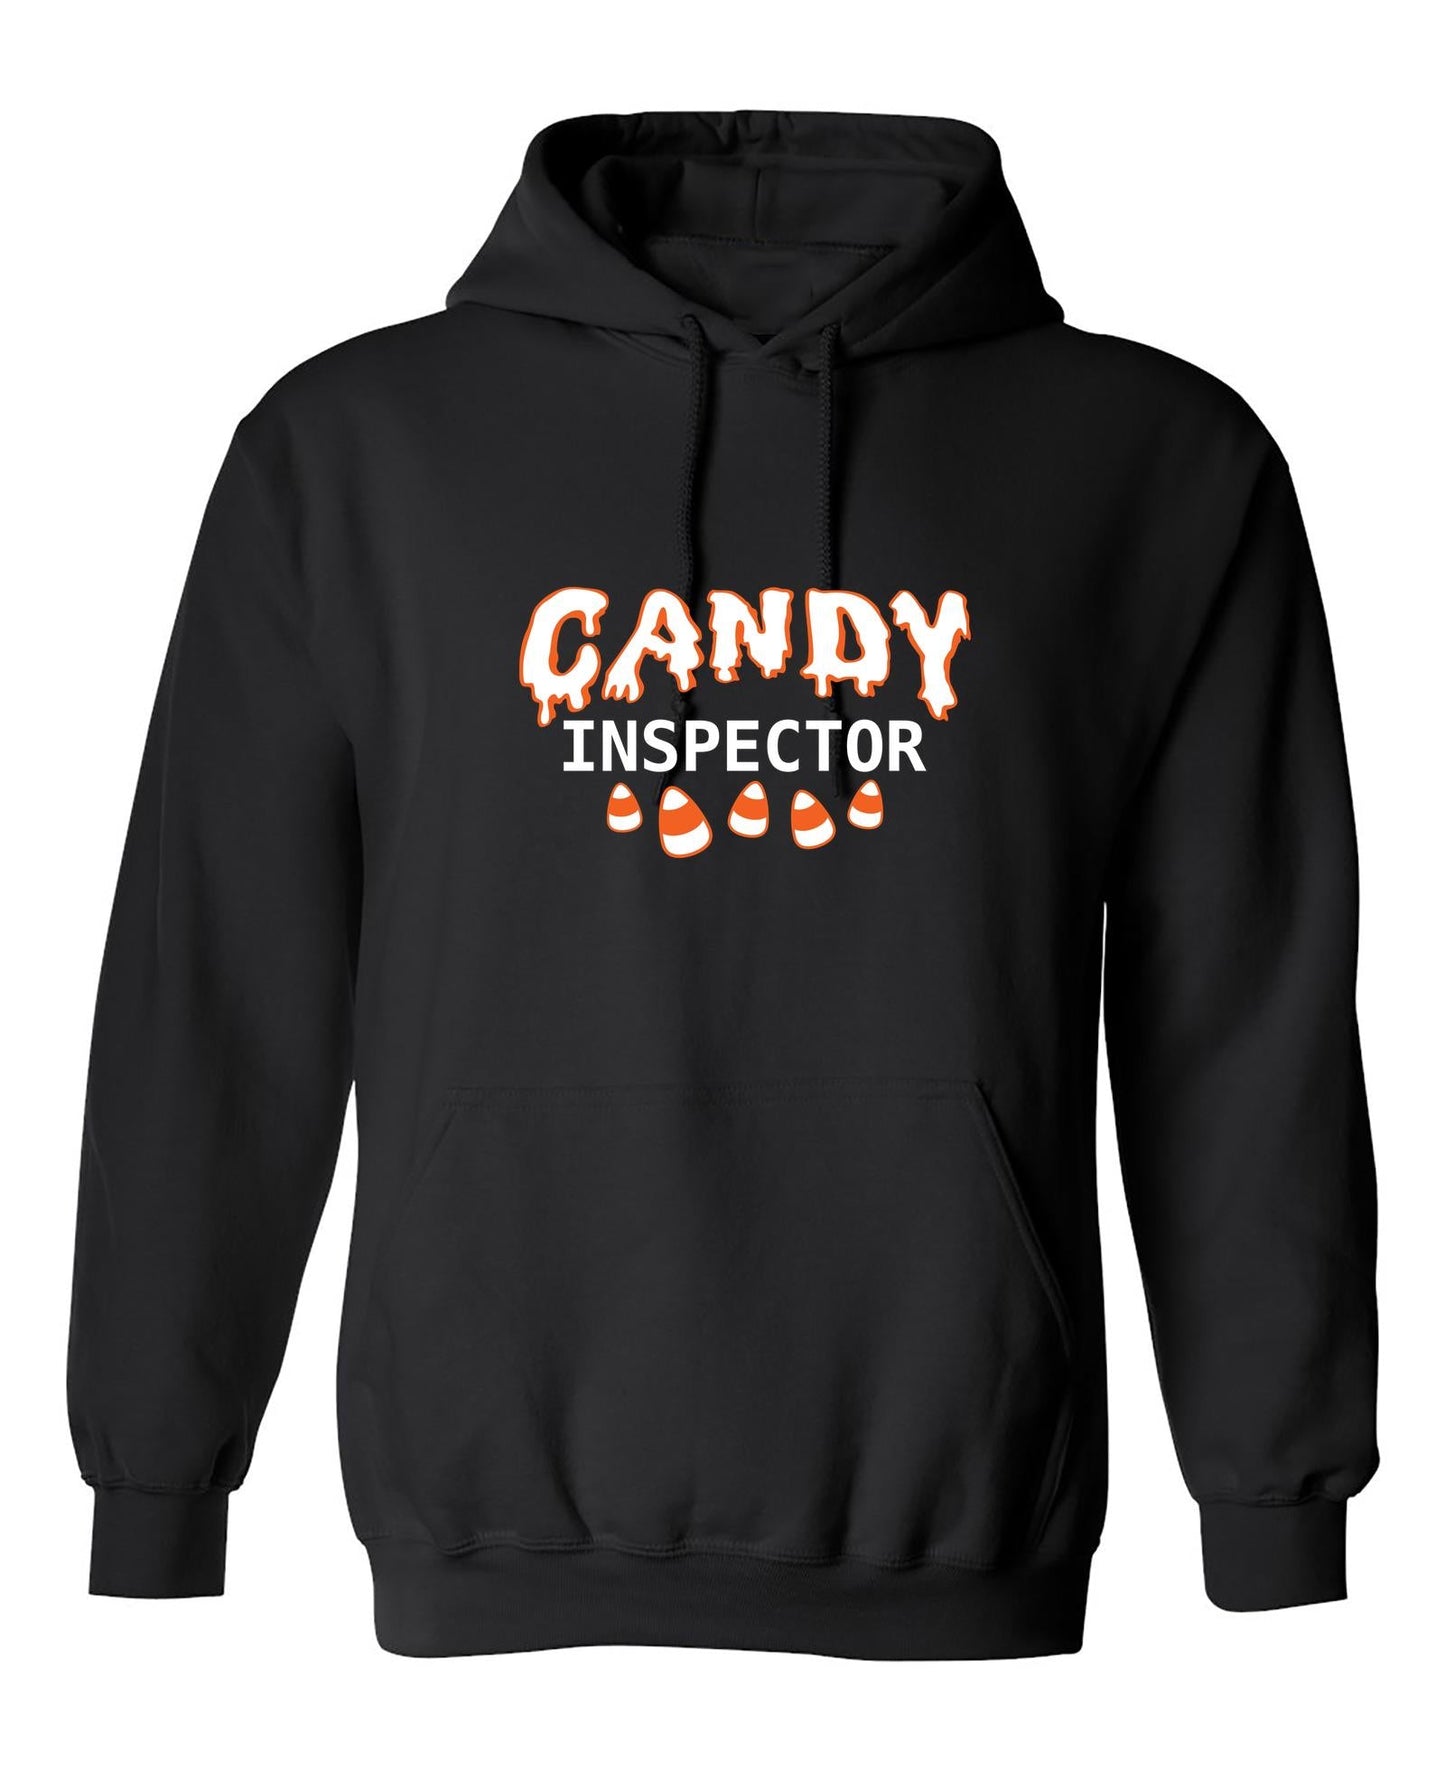 Funny T-Shirts design "Candy Inspector"